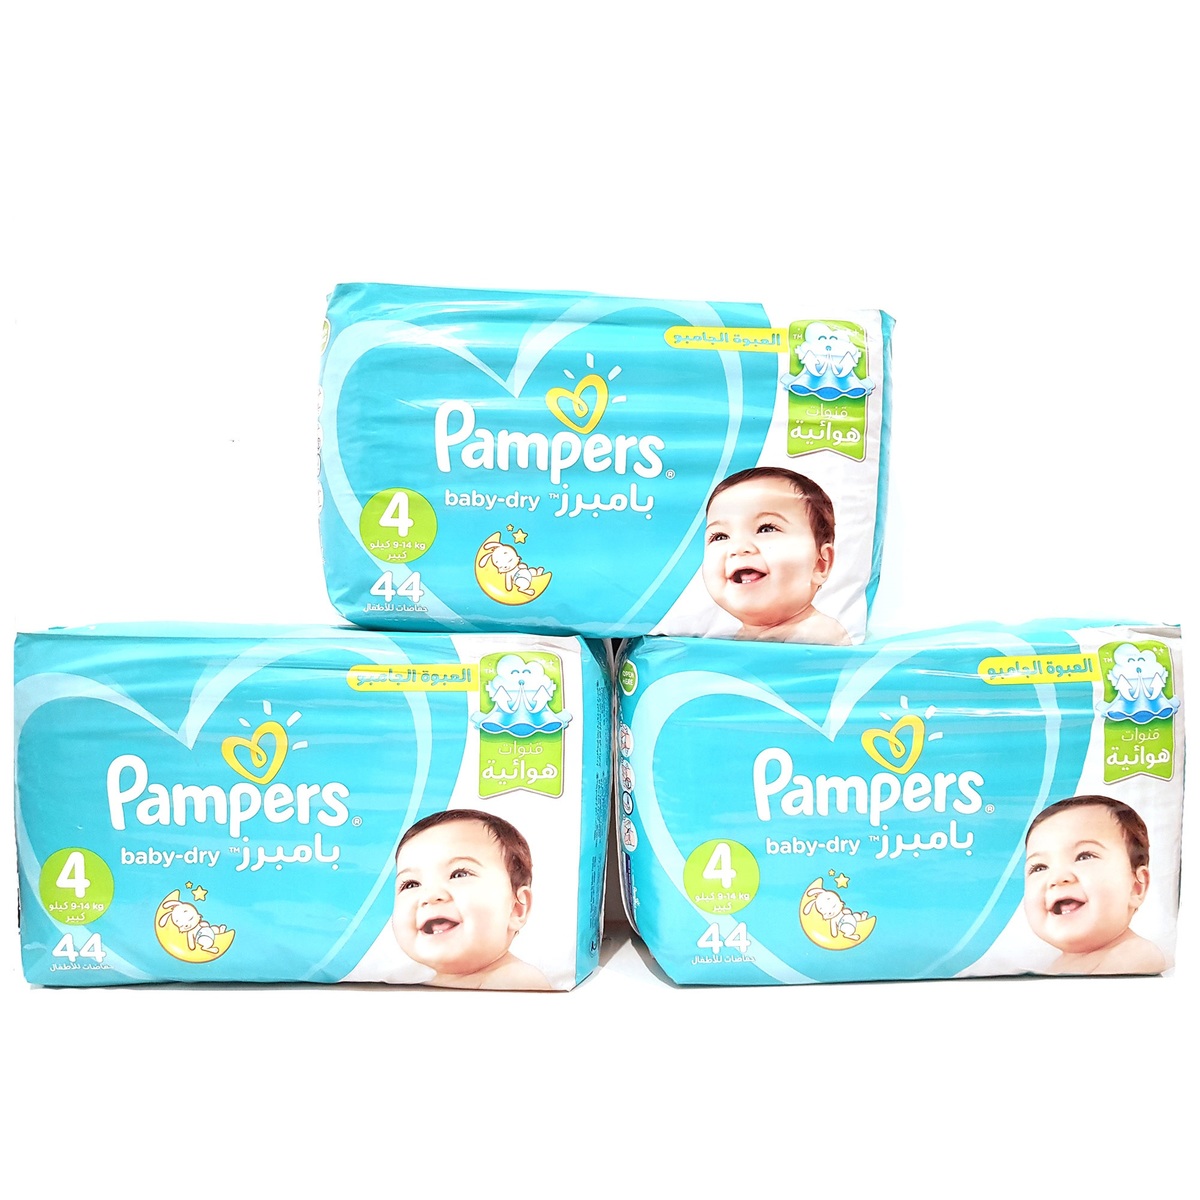 Buy Pampers Active Baby Dry Diapers Size 4, 9-14kg 3 x 44pcs Online at Best Price | Baby Nappies | Lulu Kuwait in Kuwait